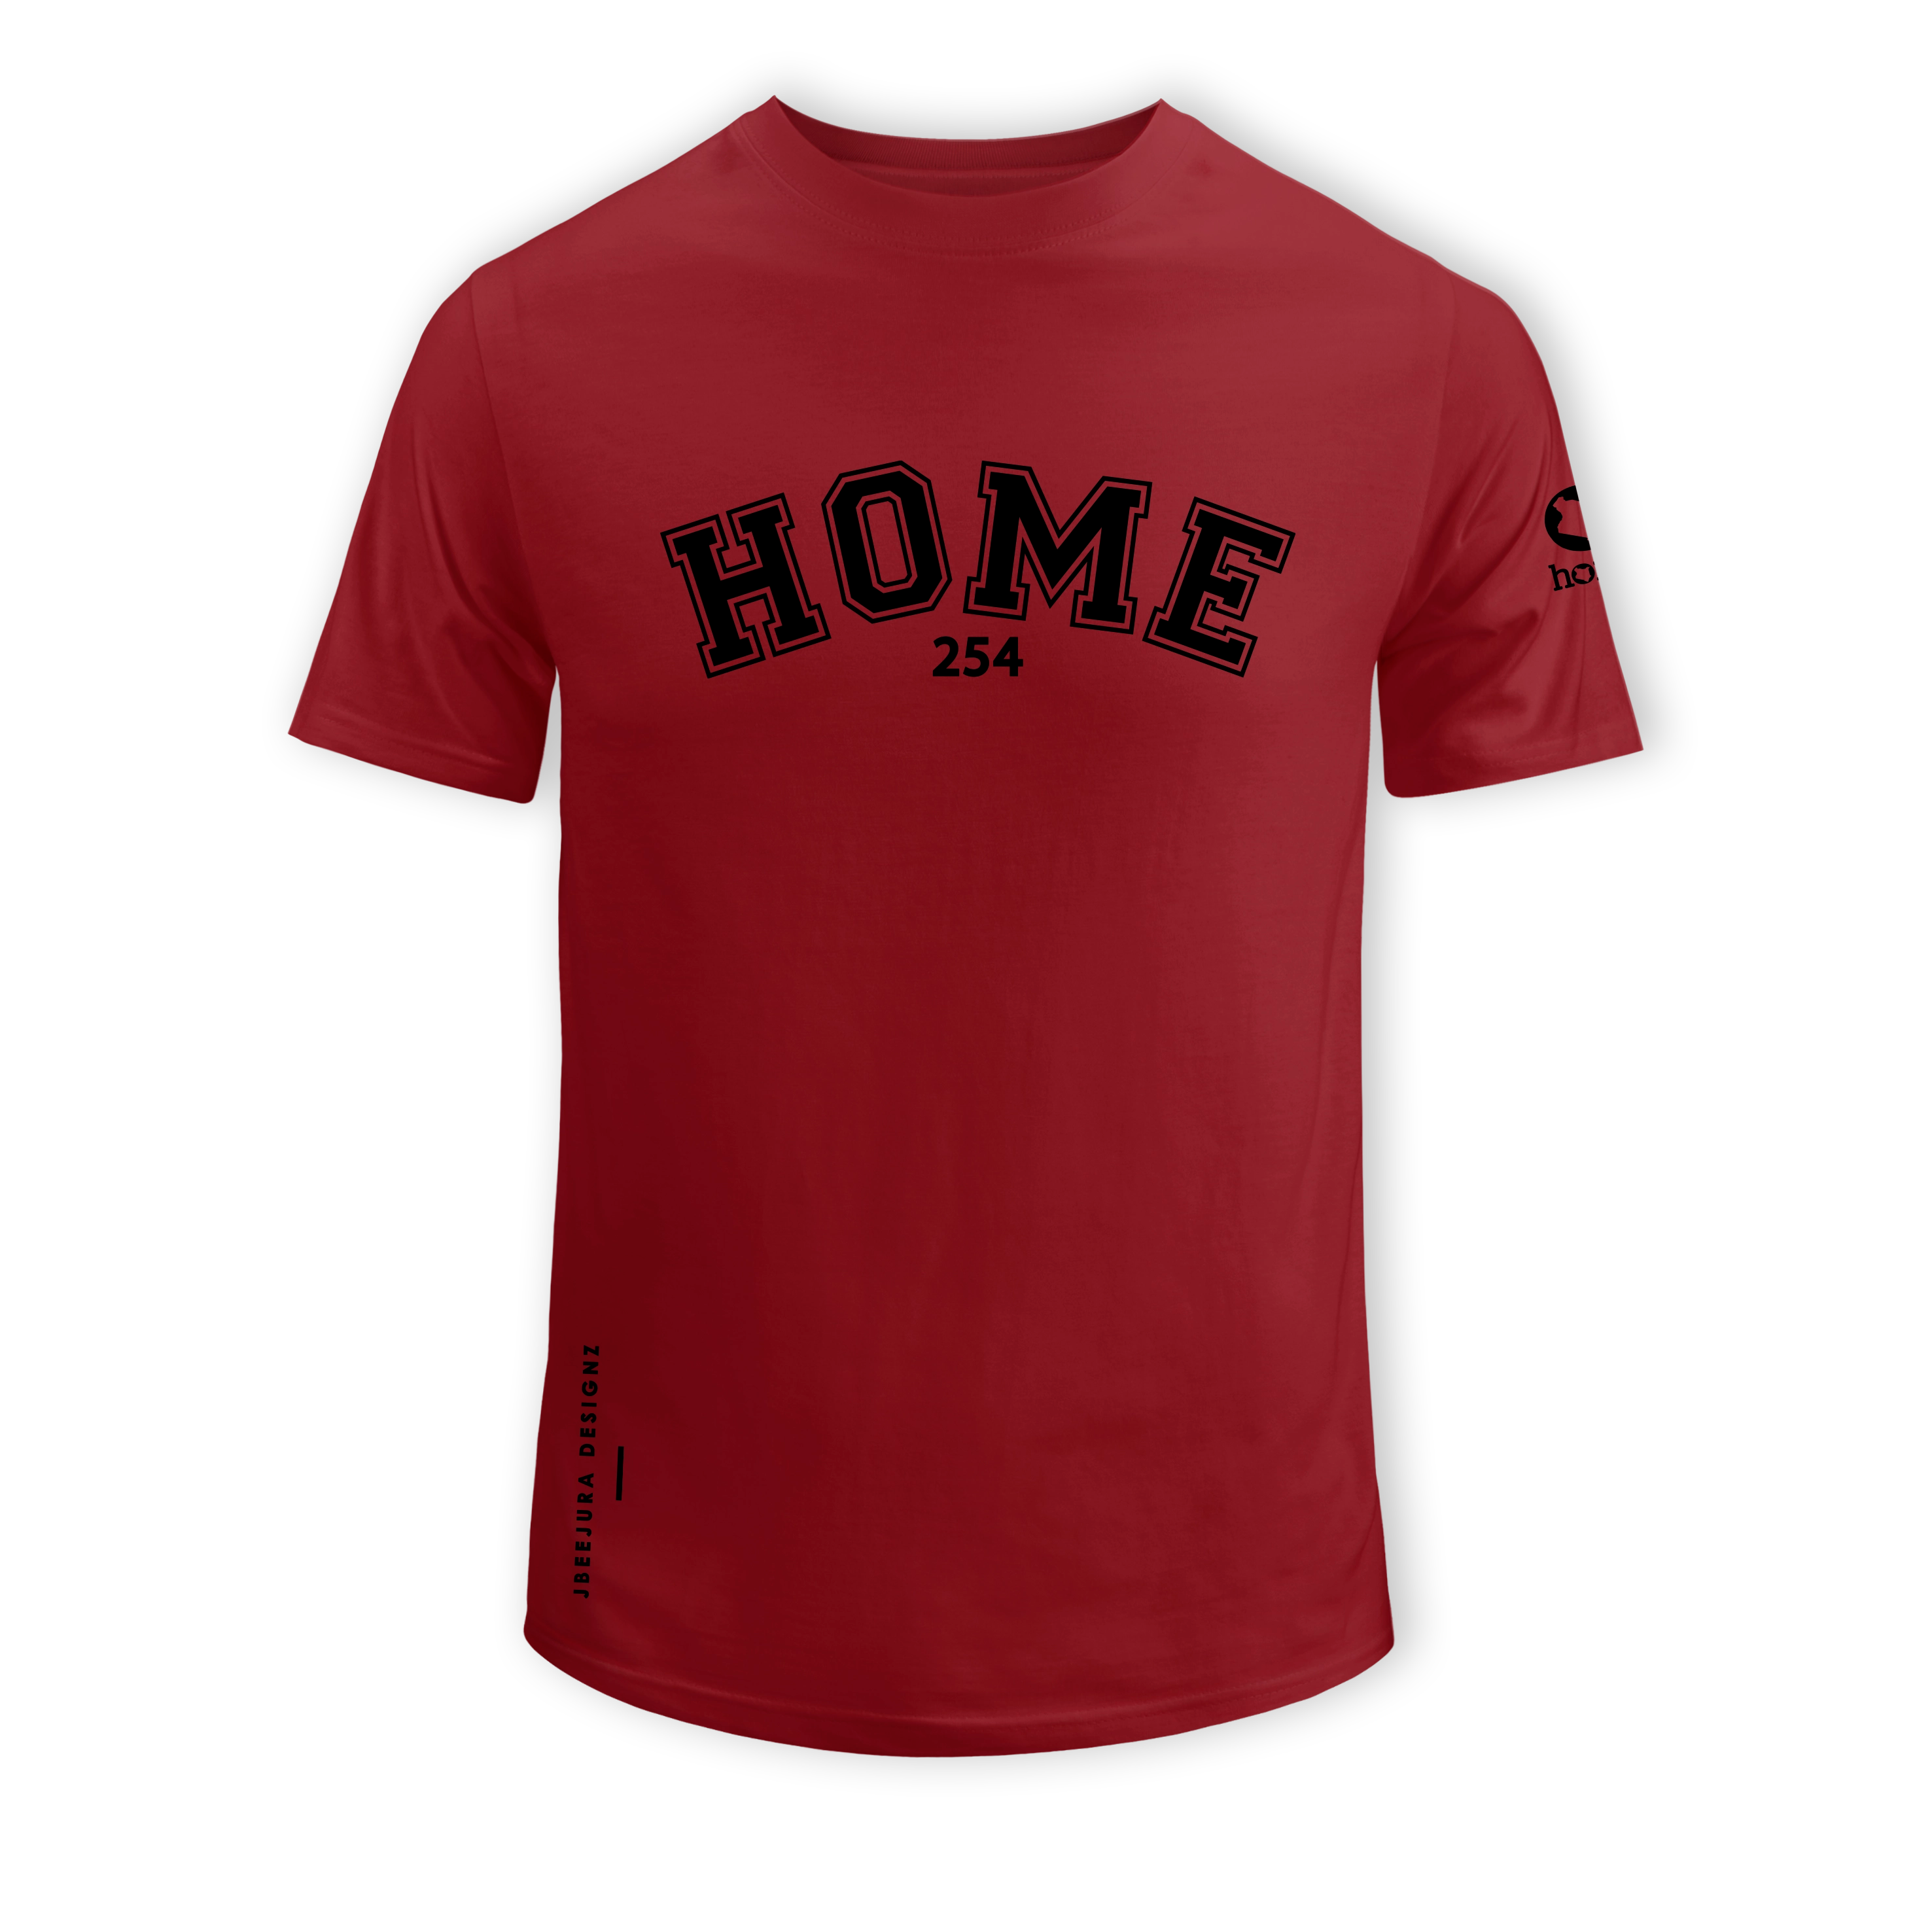 home_254 SHORT-SLEEVED MAROON RED T-SHIRT WITH A BLACK COLLEGE PRINT – COTTON PLUS FABRIC